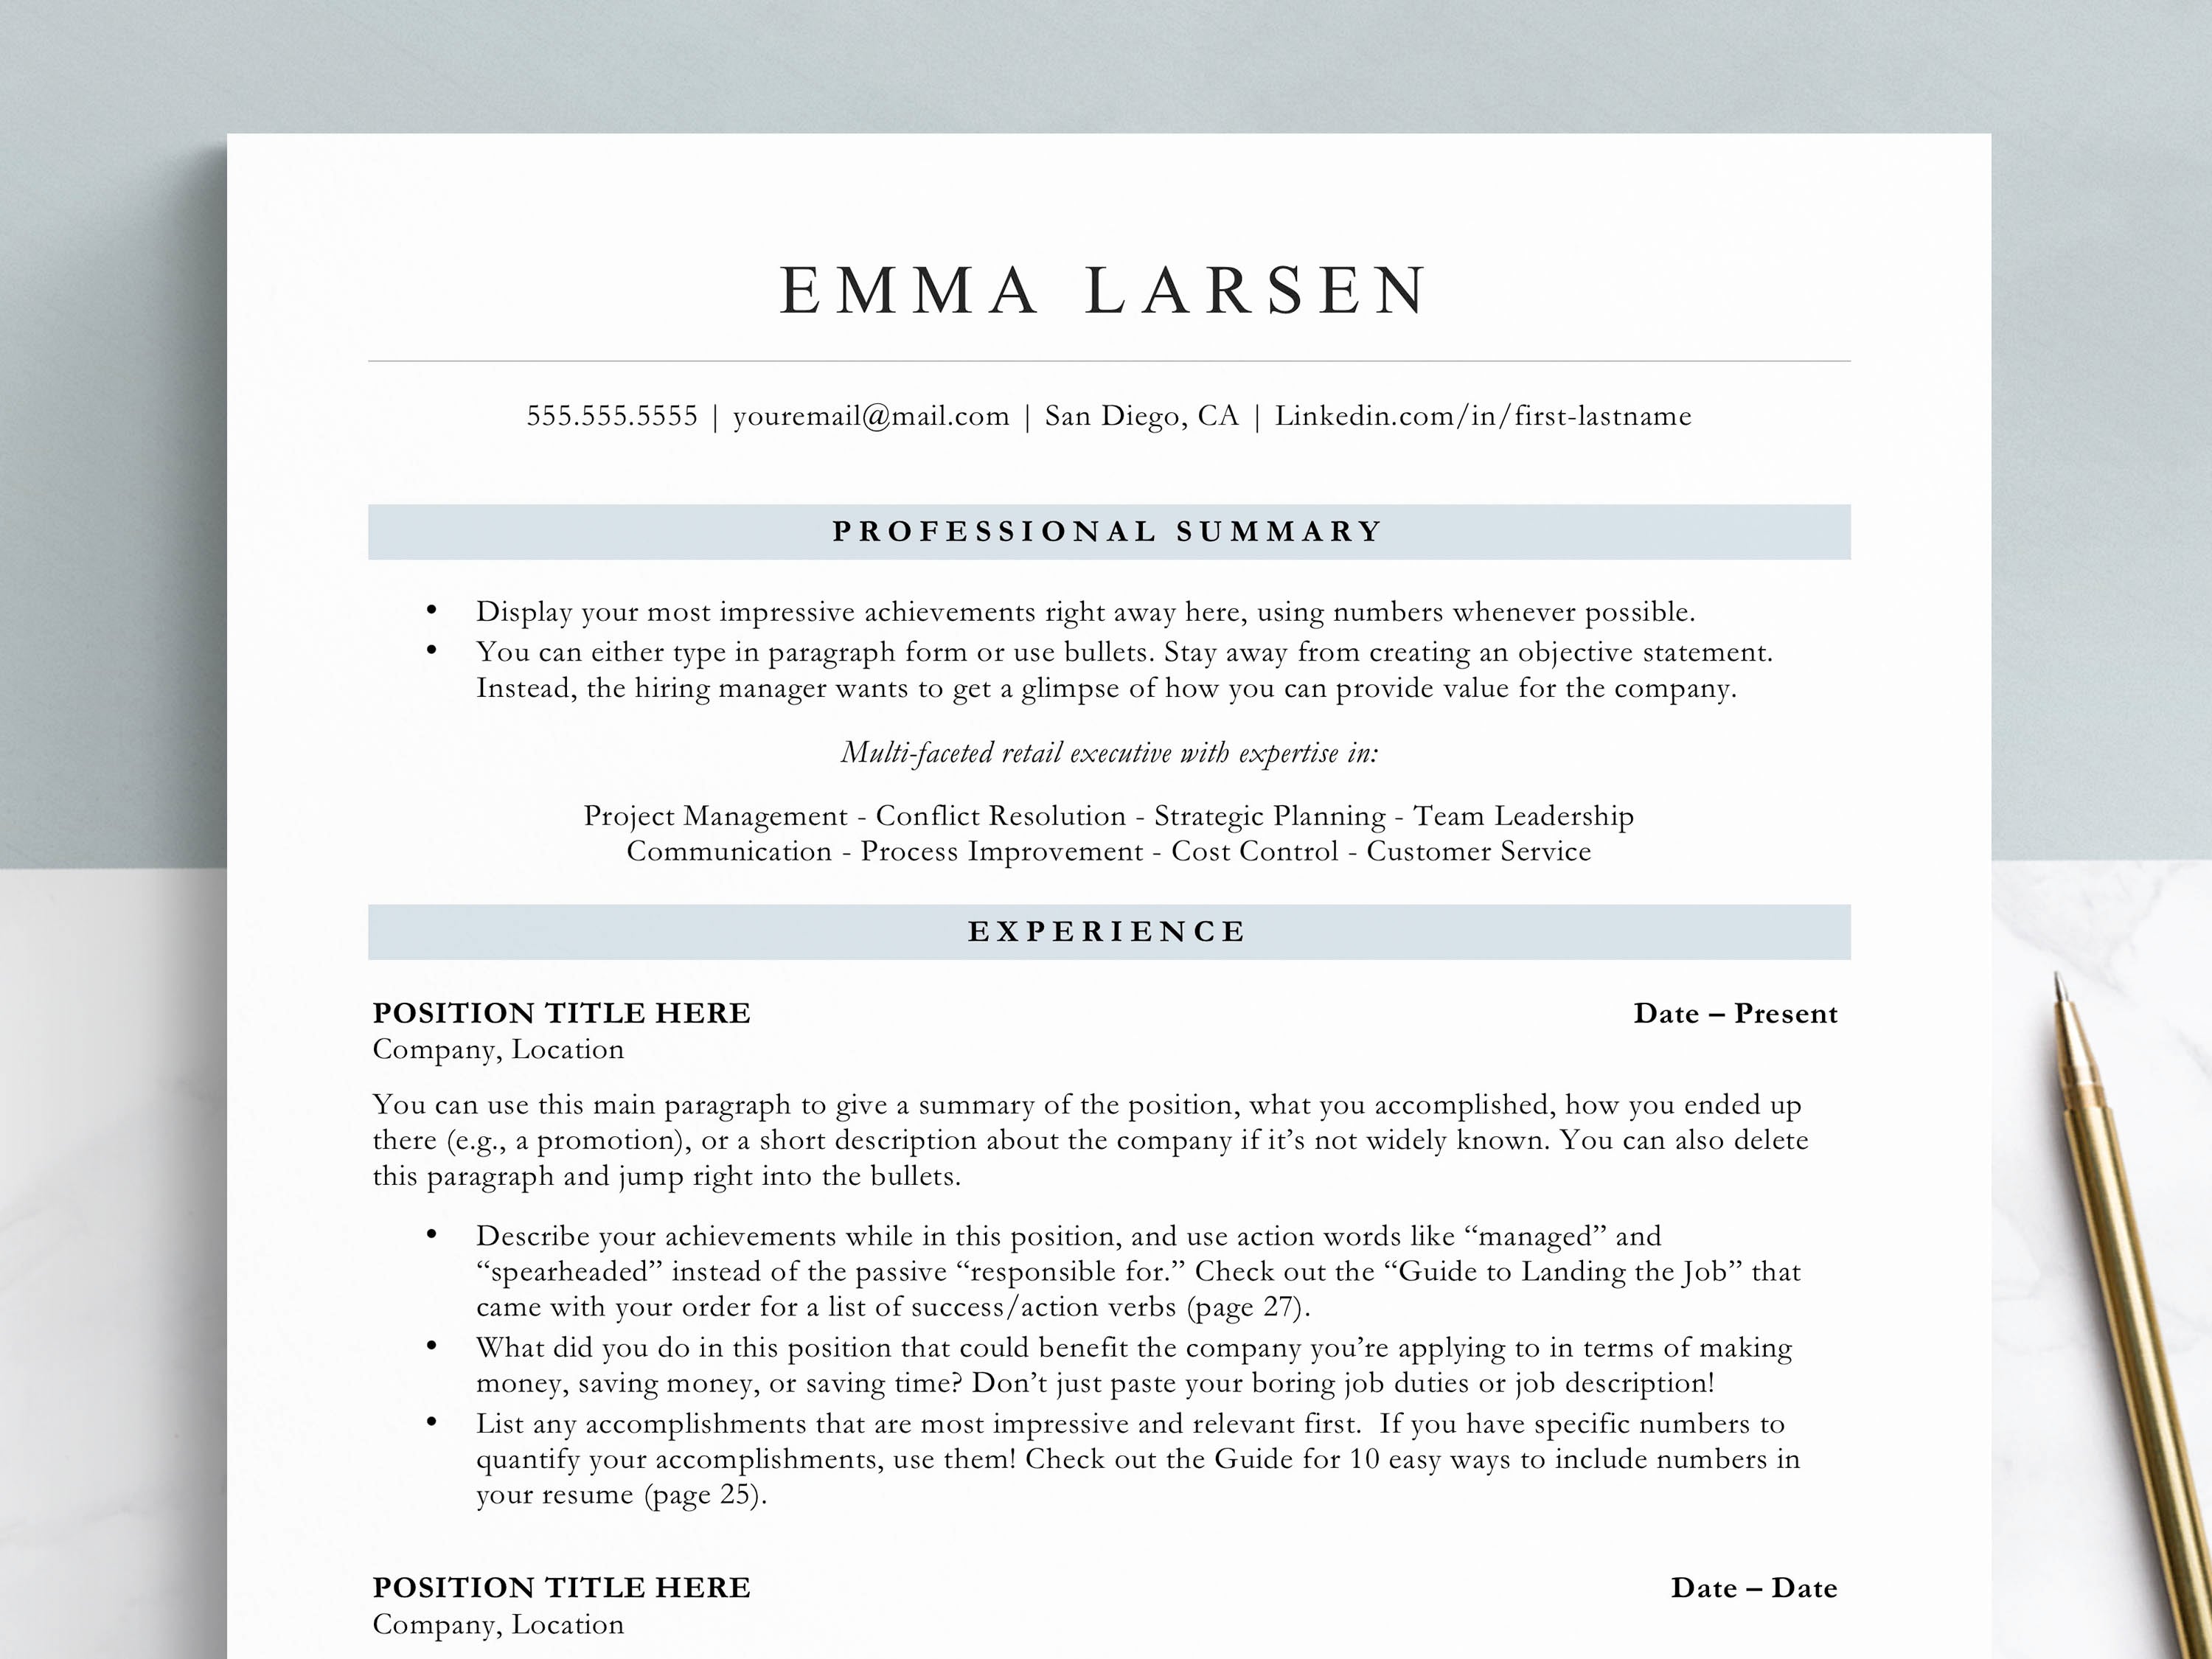 Single column resume templates, one column resume templates for word google docs pages